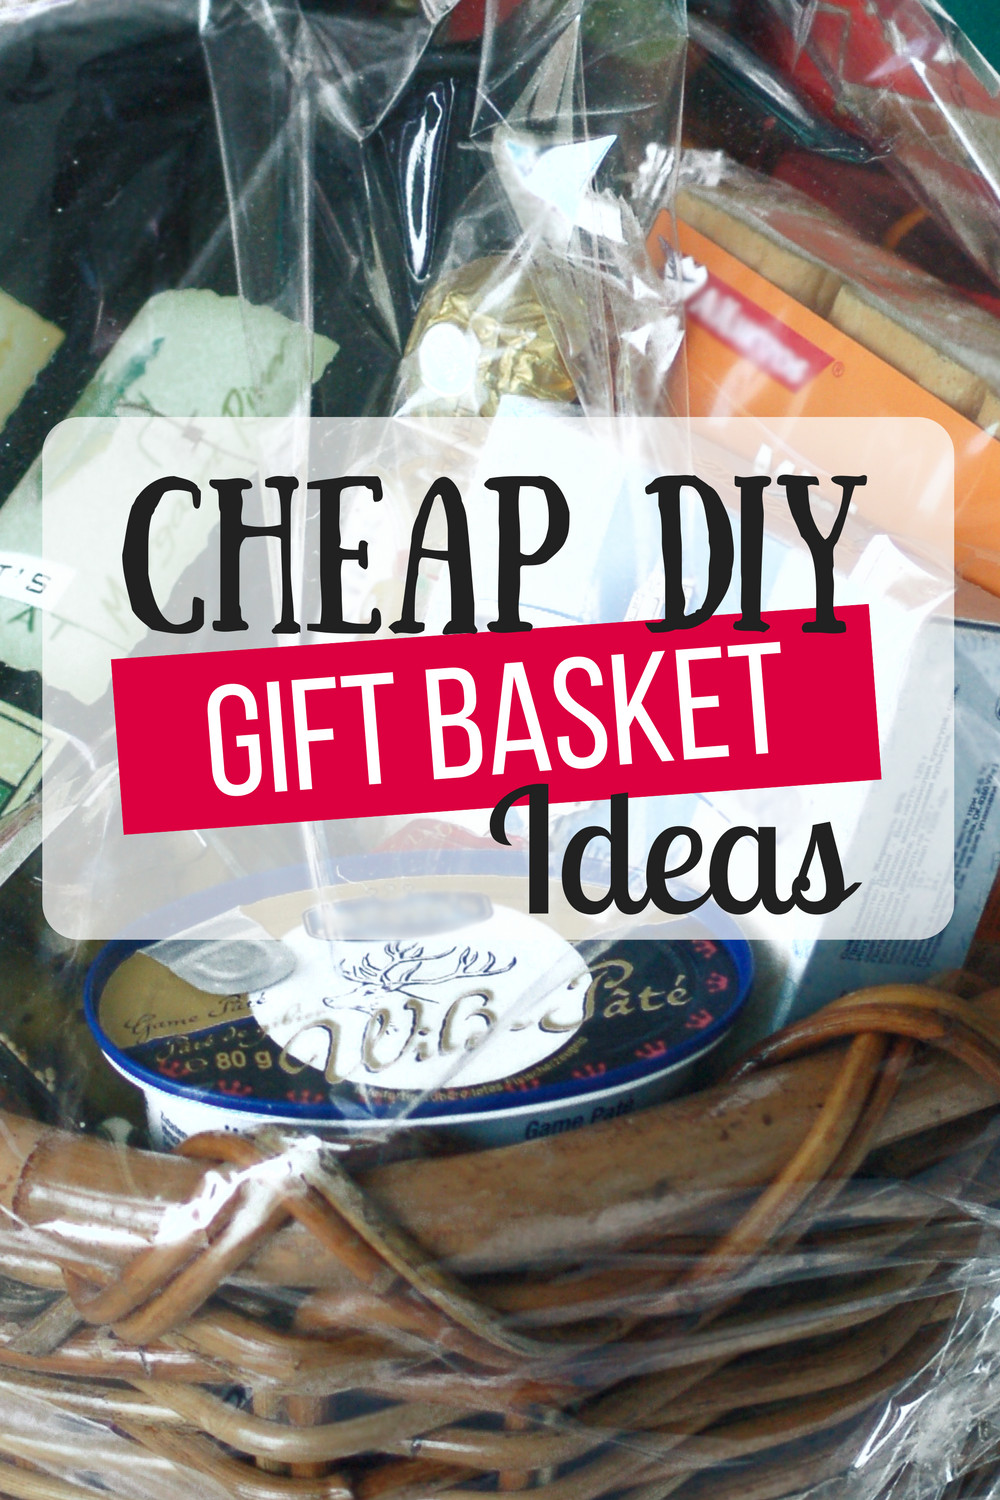 Home Made Christmas Gift Basket Ideas
 Cheap DIY Gift Baskets The Busy Bud er